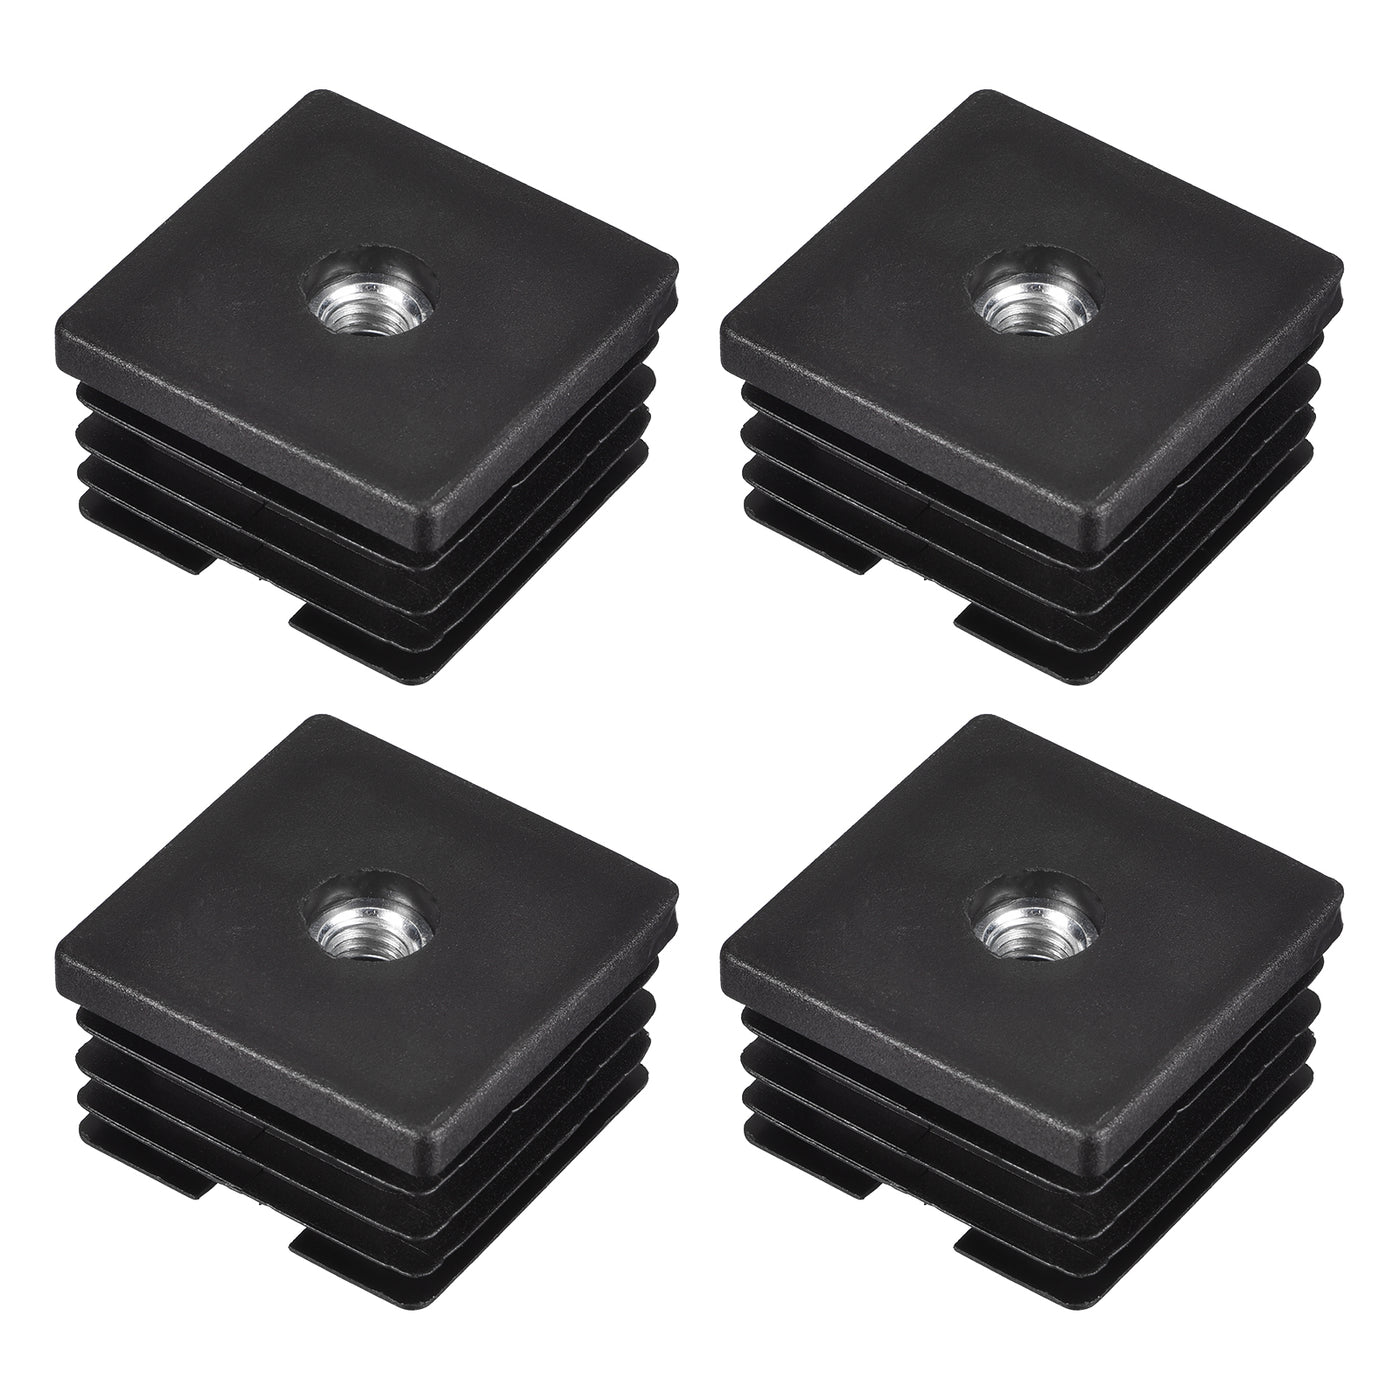 uxcell Uxcell 4Pcs 1.57"x1.57" Caster Insert with Thread, Square M8 Thread for Furniture